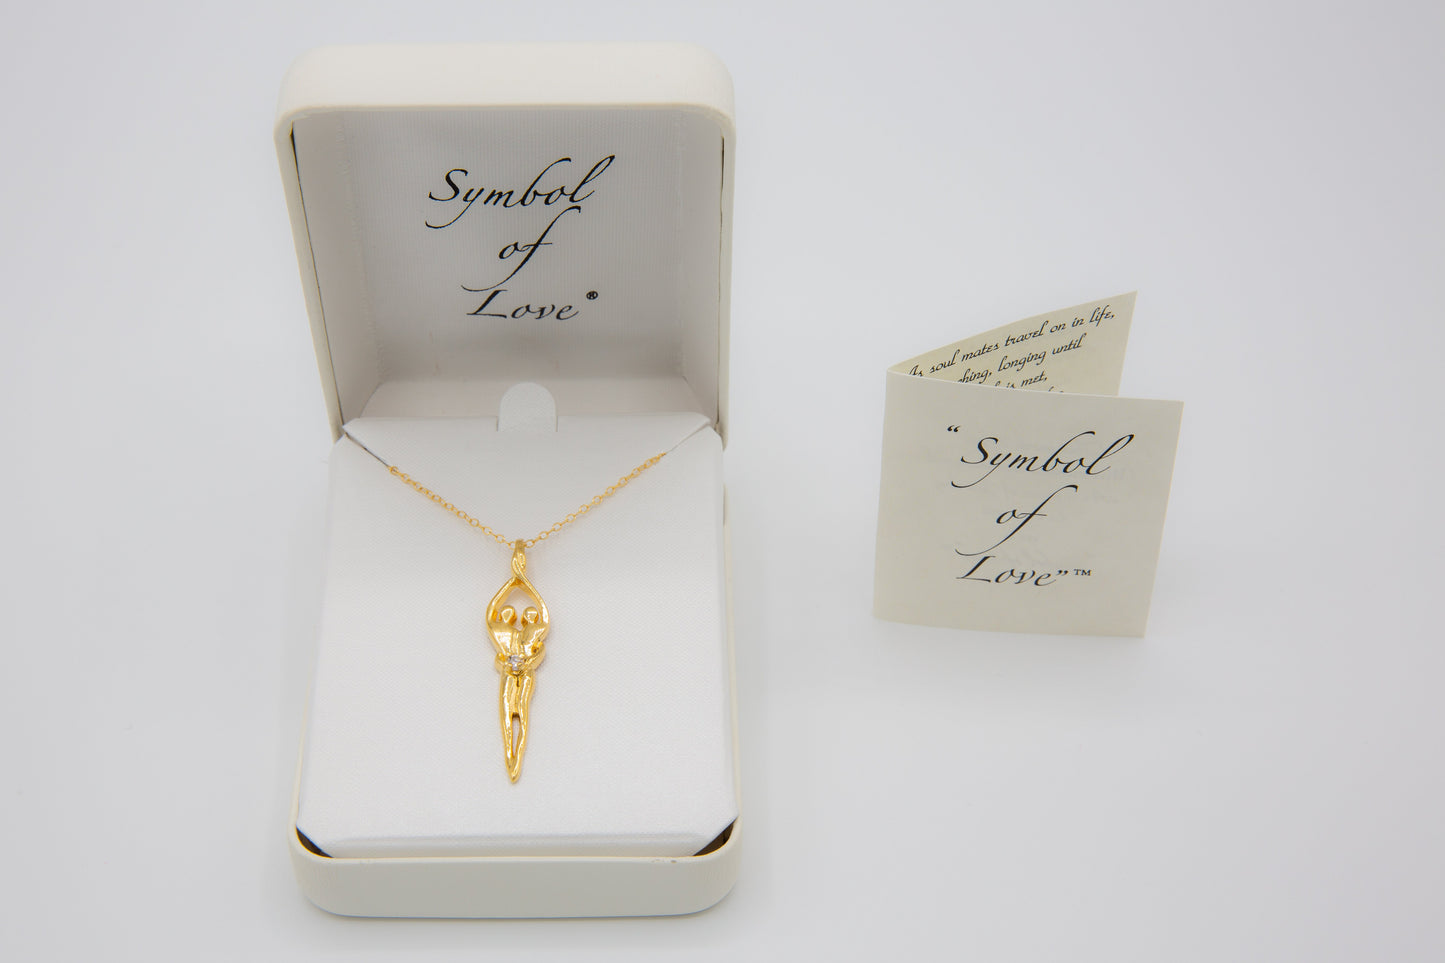 Large Soulmate Necklace, .925 Genuine Sterling Silver with 14kt Gold Overlay, 18" Chain, Charm 1 ¼" by 7/16", Clear Cubic Zirconia